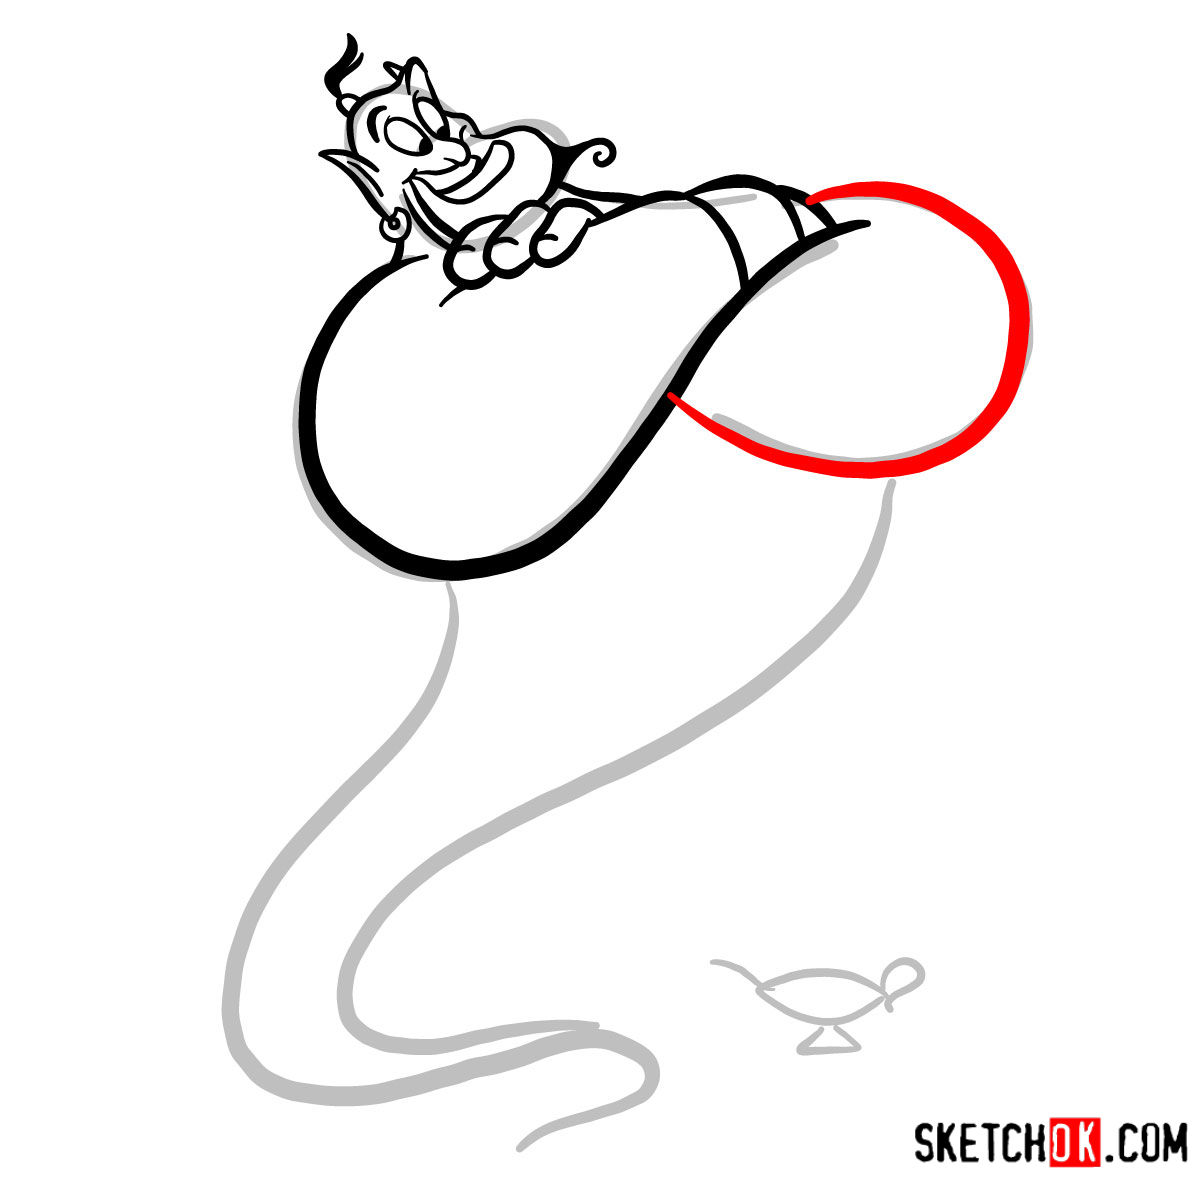 How to draw Genie and the lamp from Aladdin - step 06